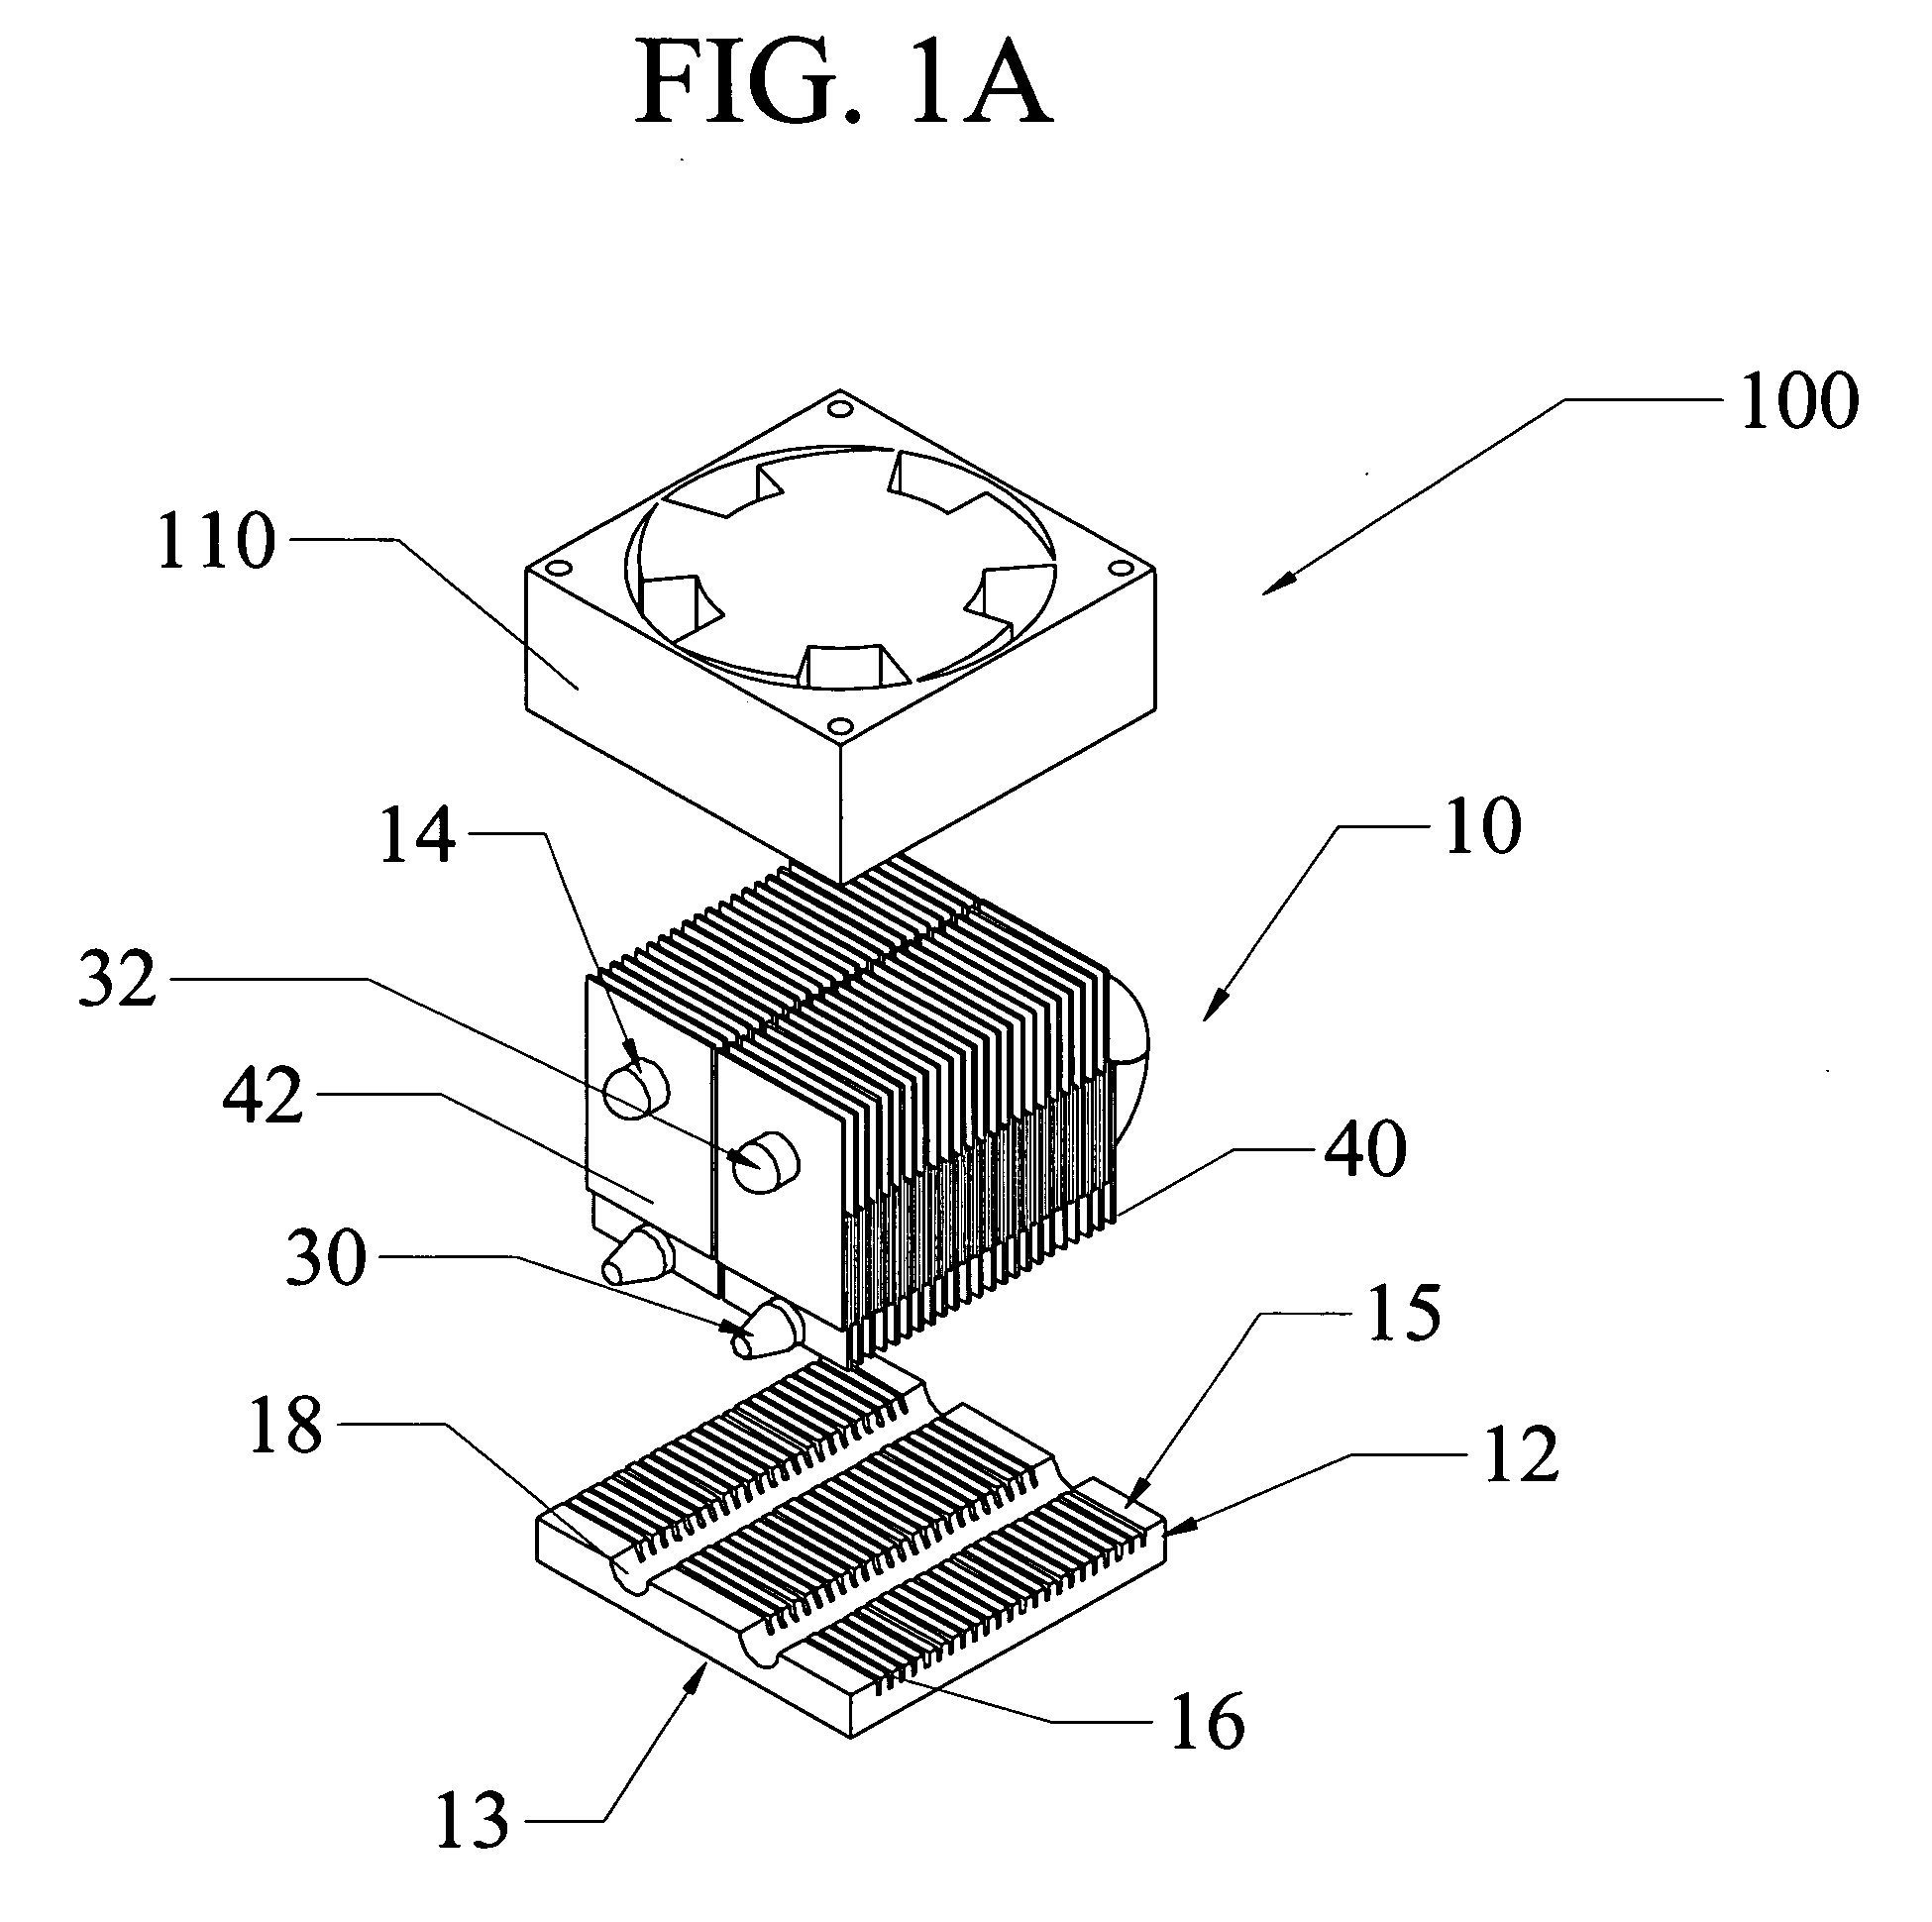 Heat sink and heat sink assembly